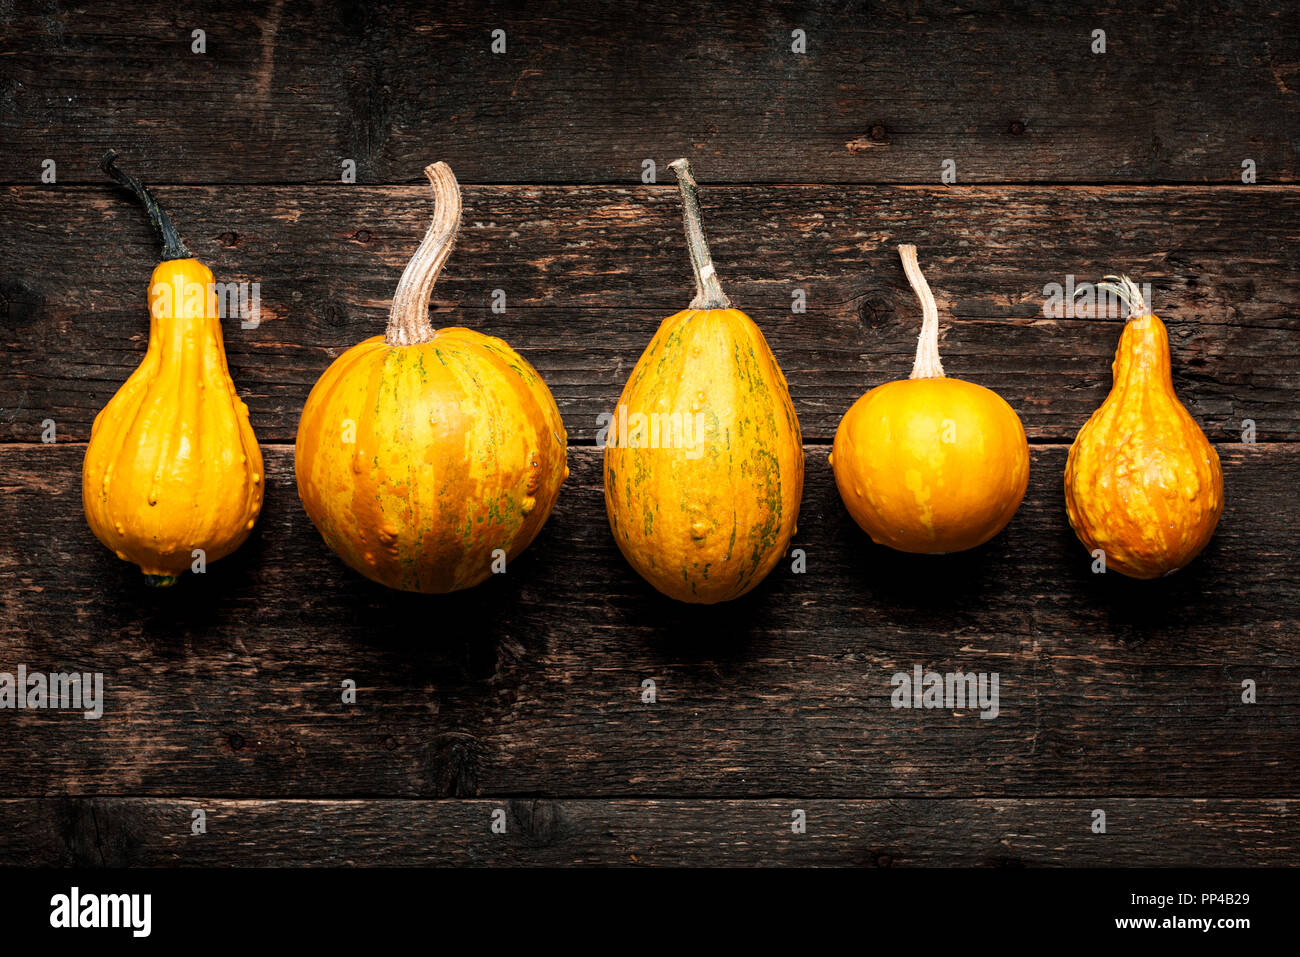 Happy Thanksgiving Background. Selection of various pumpkins on dark wooden background. Autumn vegetables and seasonal decorations. Autumn Harvest and Stock Photo